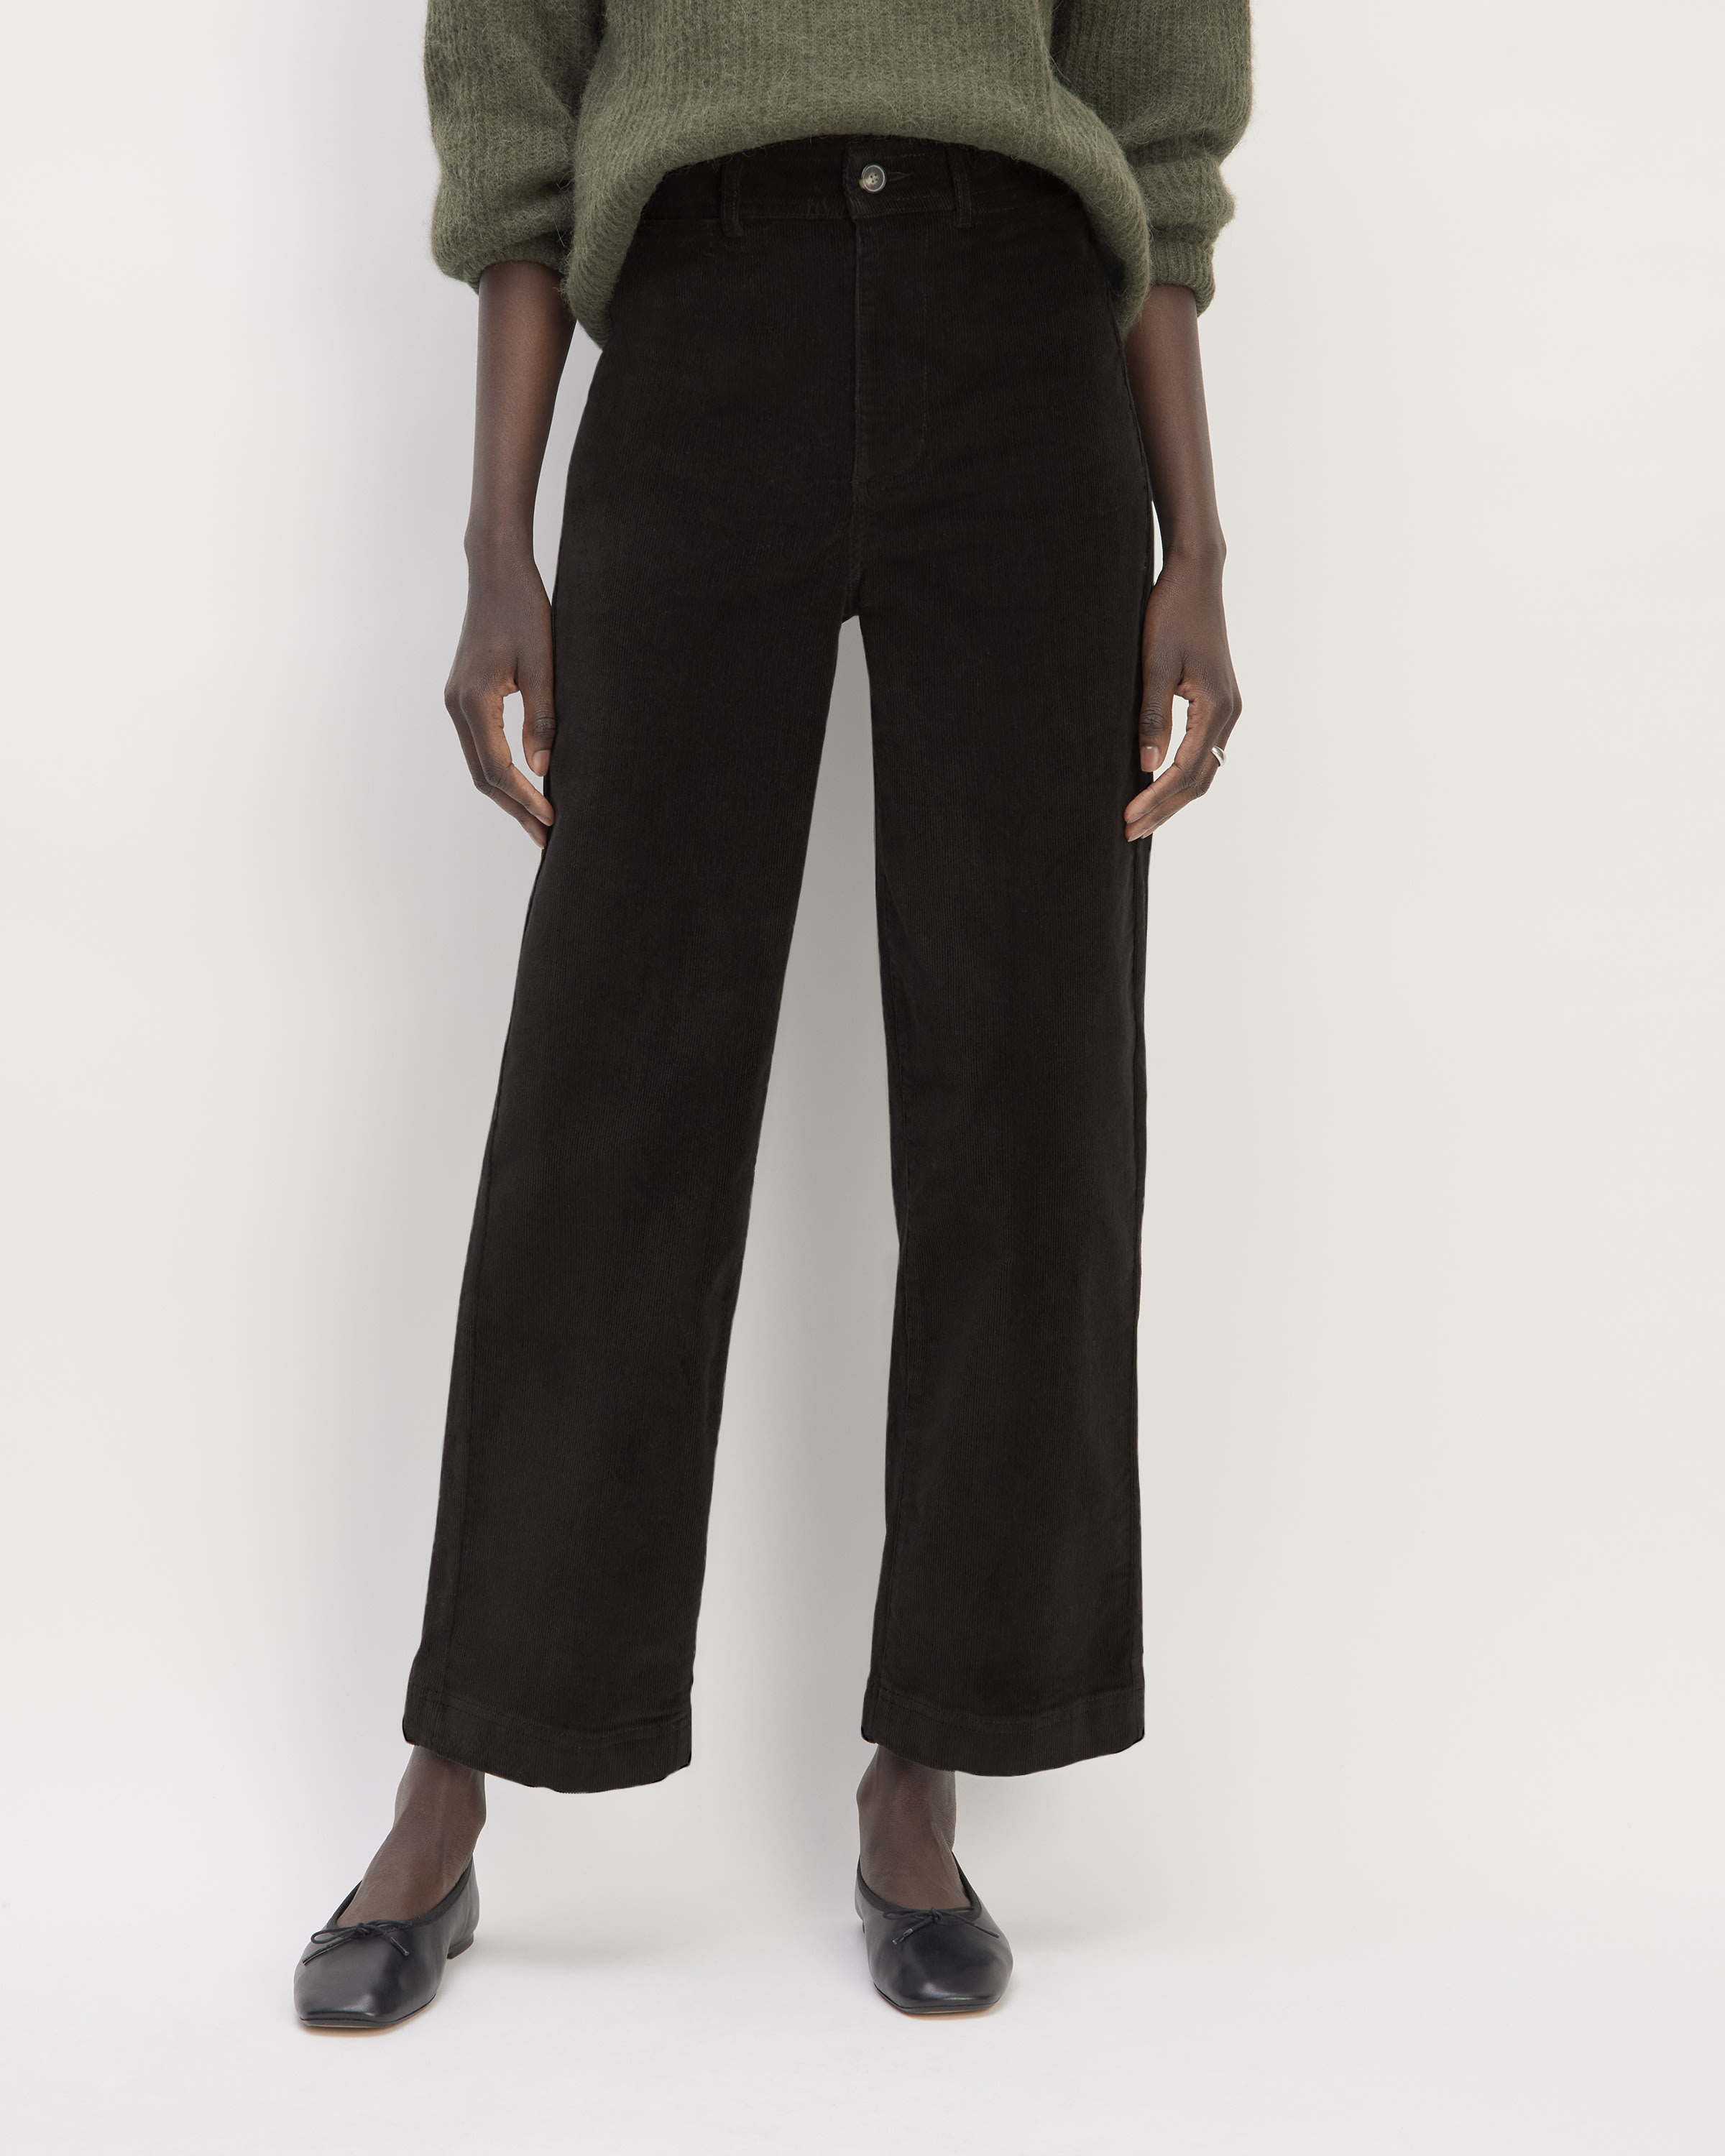 Everlane Corduroy Wide Leg Pant review ⋆ chic everywhere